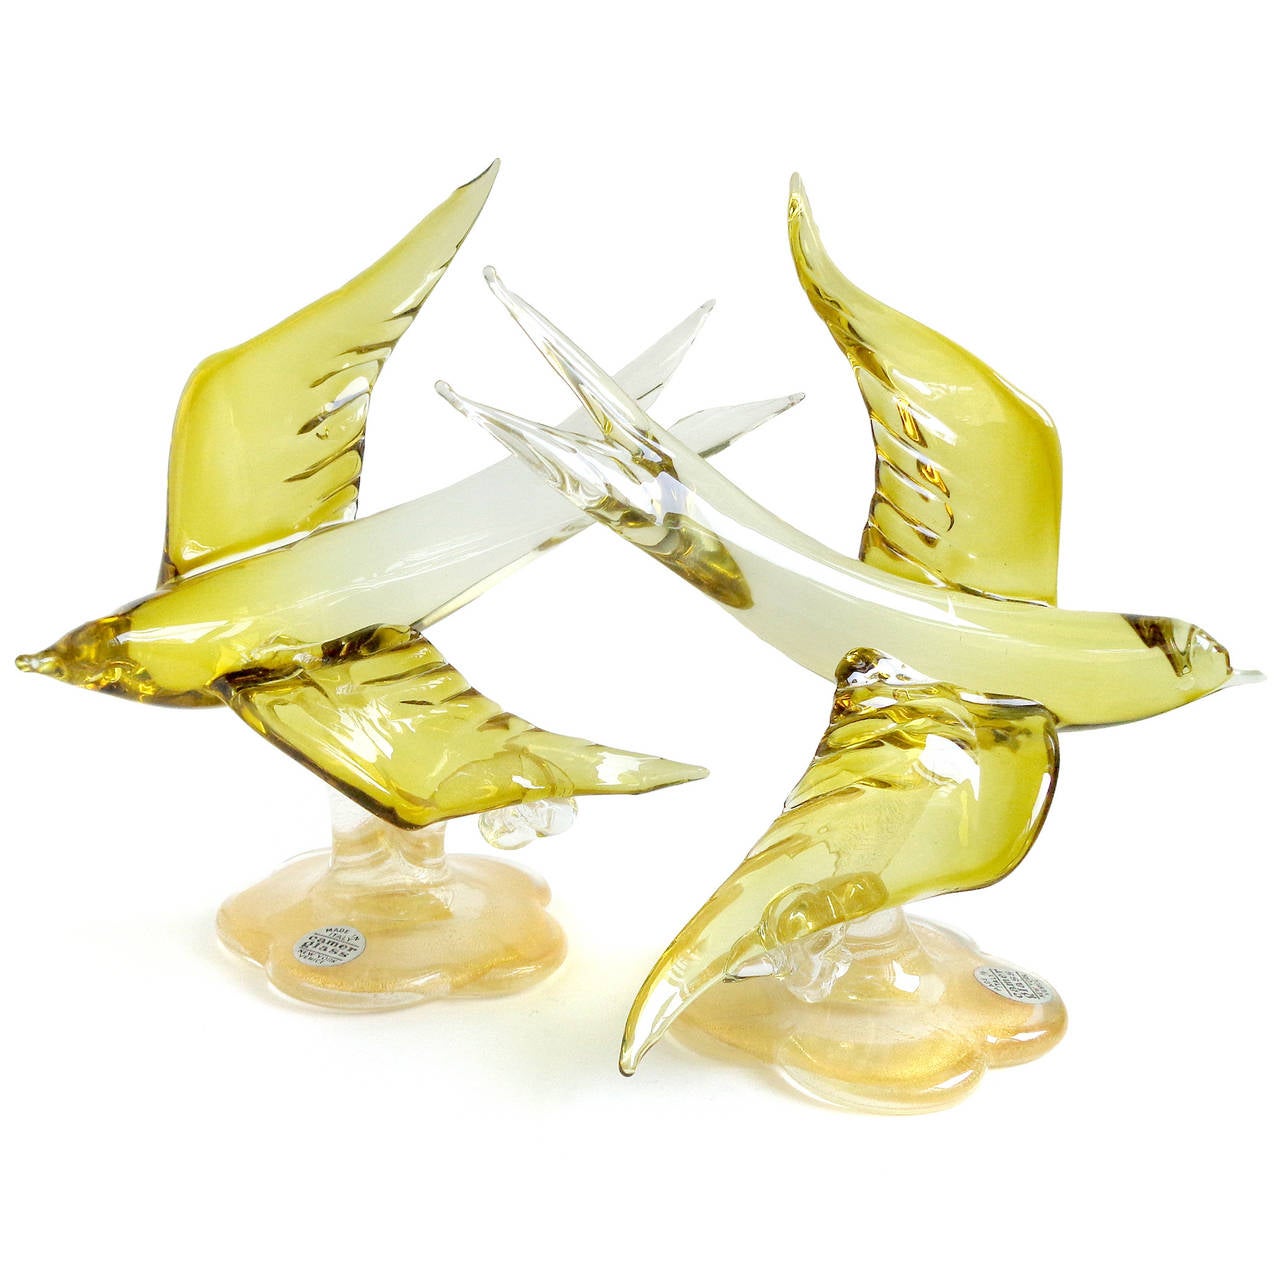 Beautiful rare set of vintage Murano hand blown olive yellow and gold flecks Italian art glass swallow bird sculptures. Attributed to designer Alfredo Barbini, circa 1950s. Captured in mid-flight! They have original 